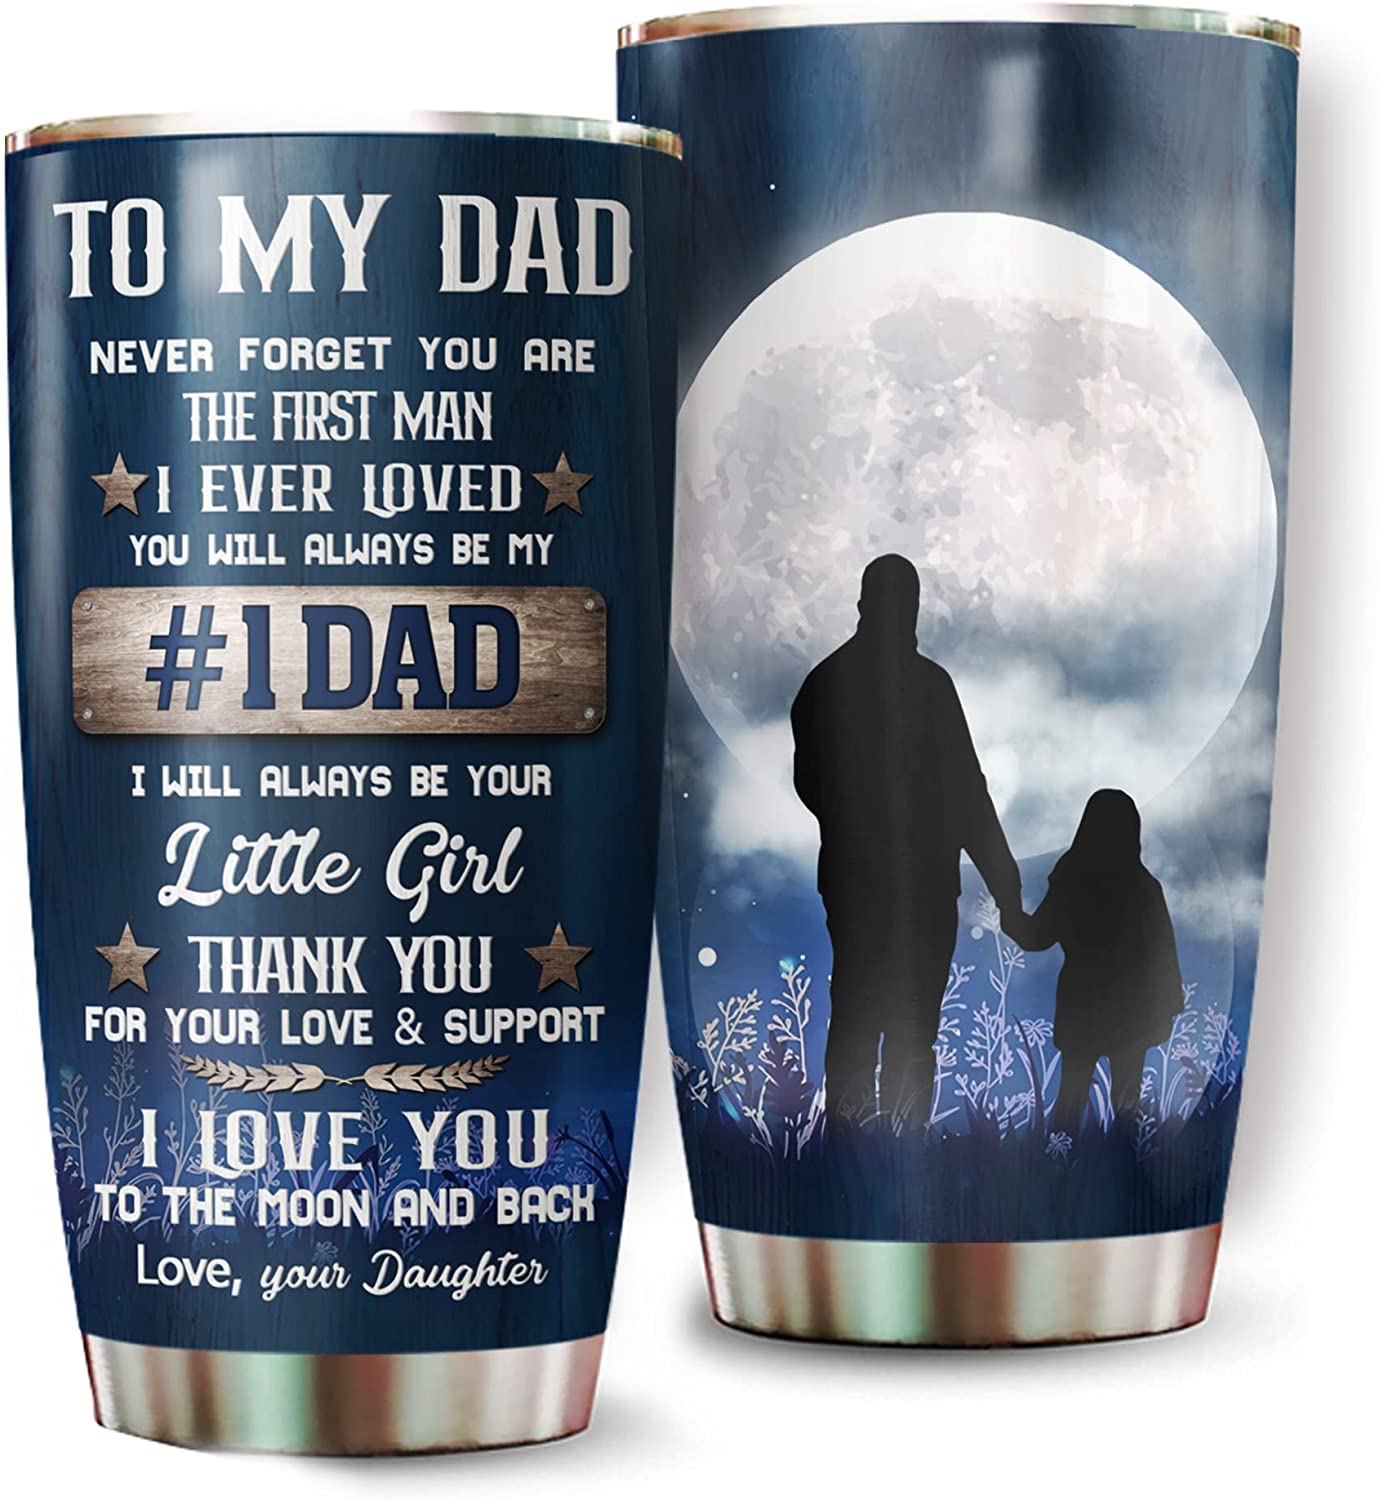  Best Dad Ever Travel Coffee Mug Father's day Gift